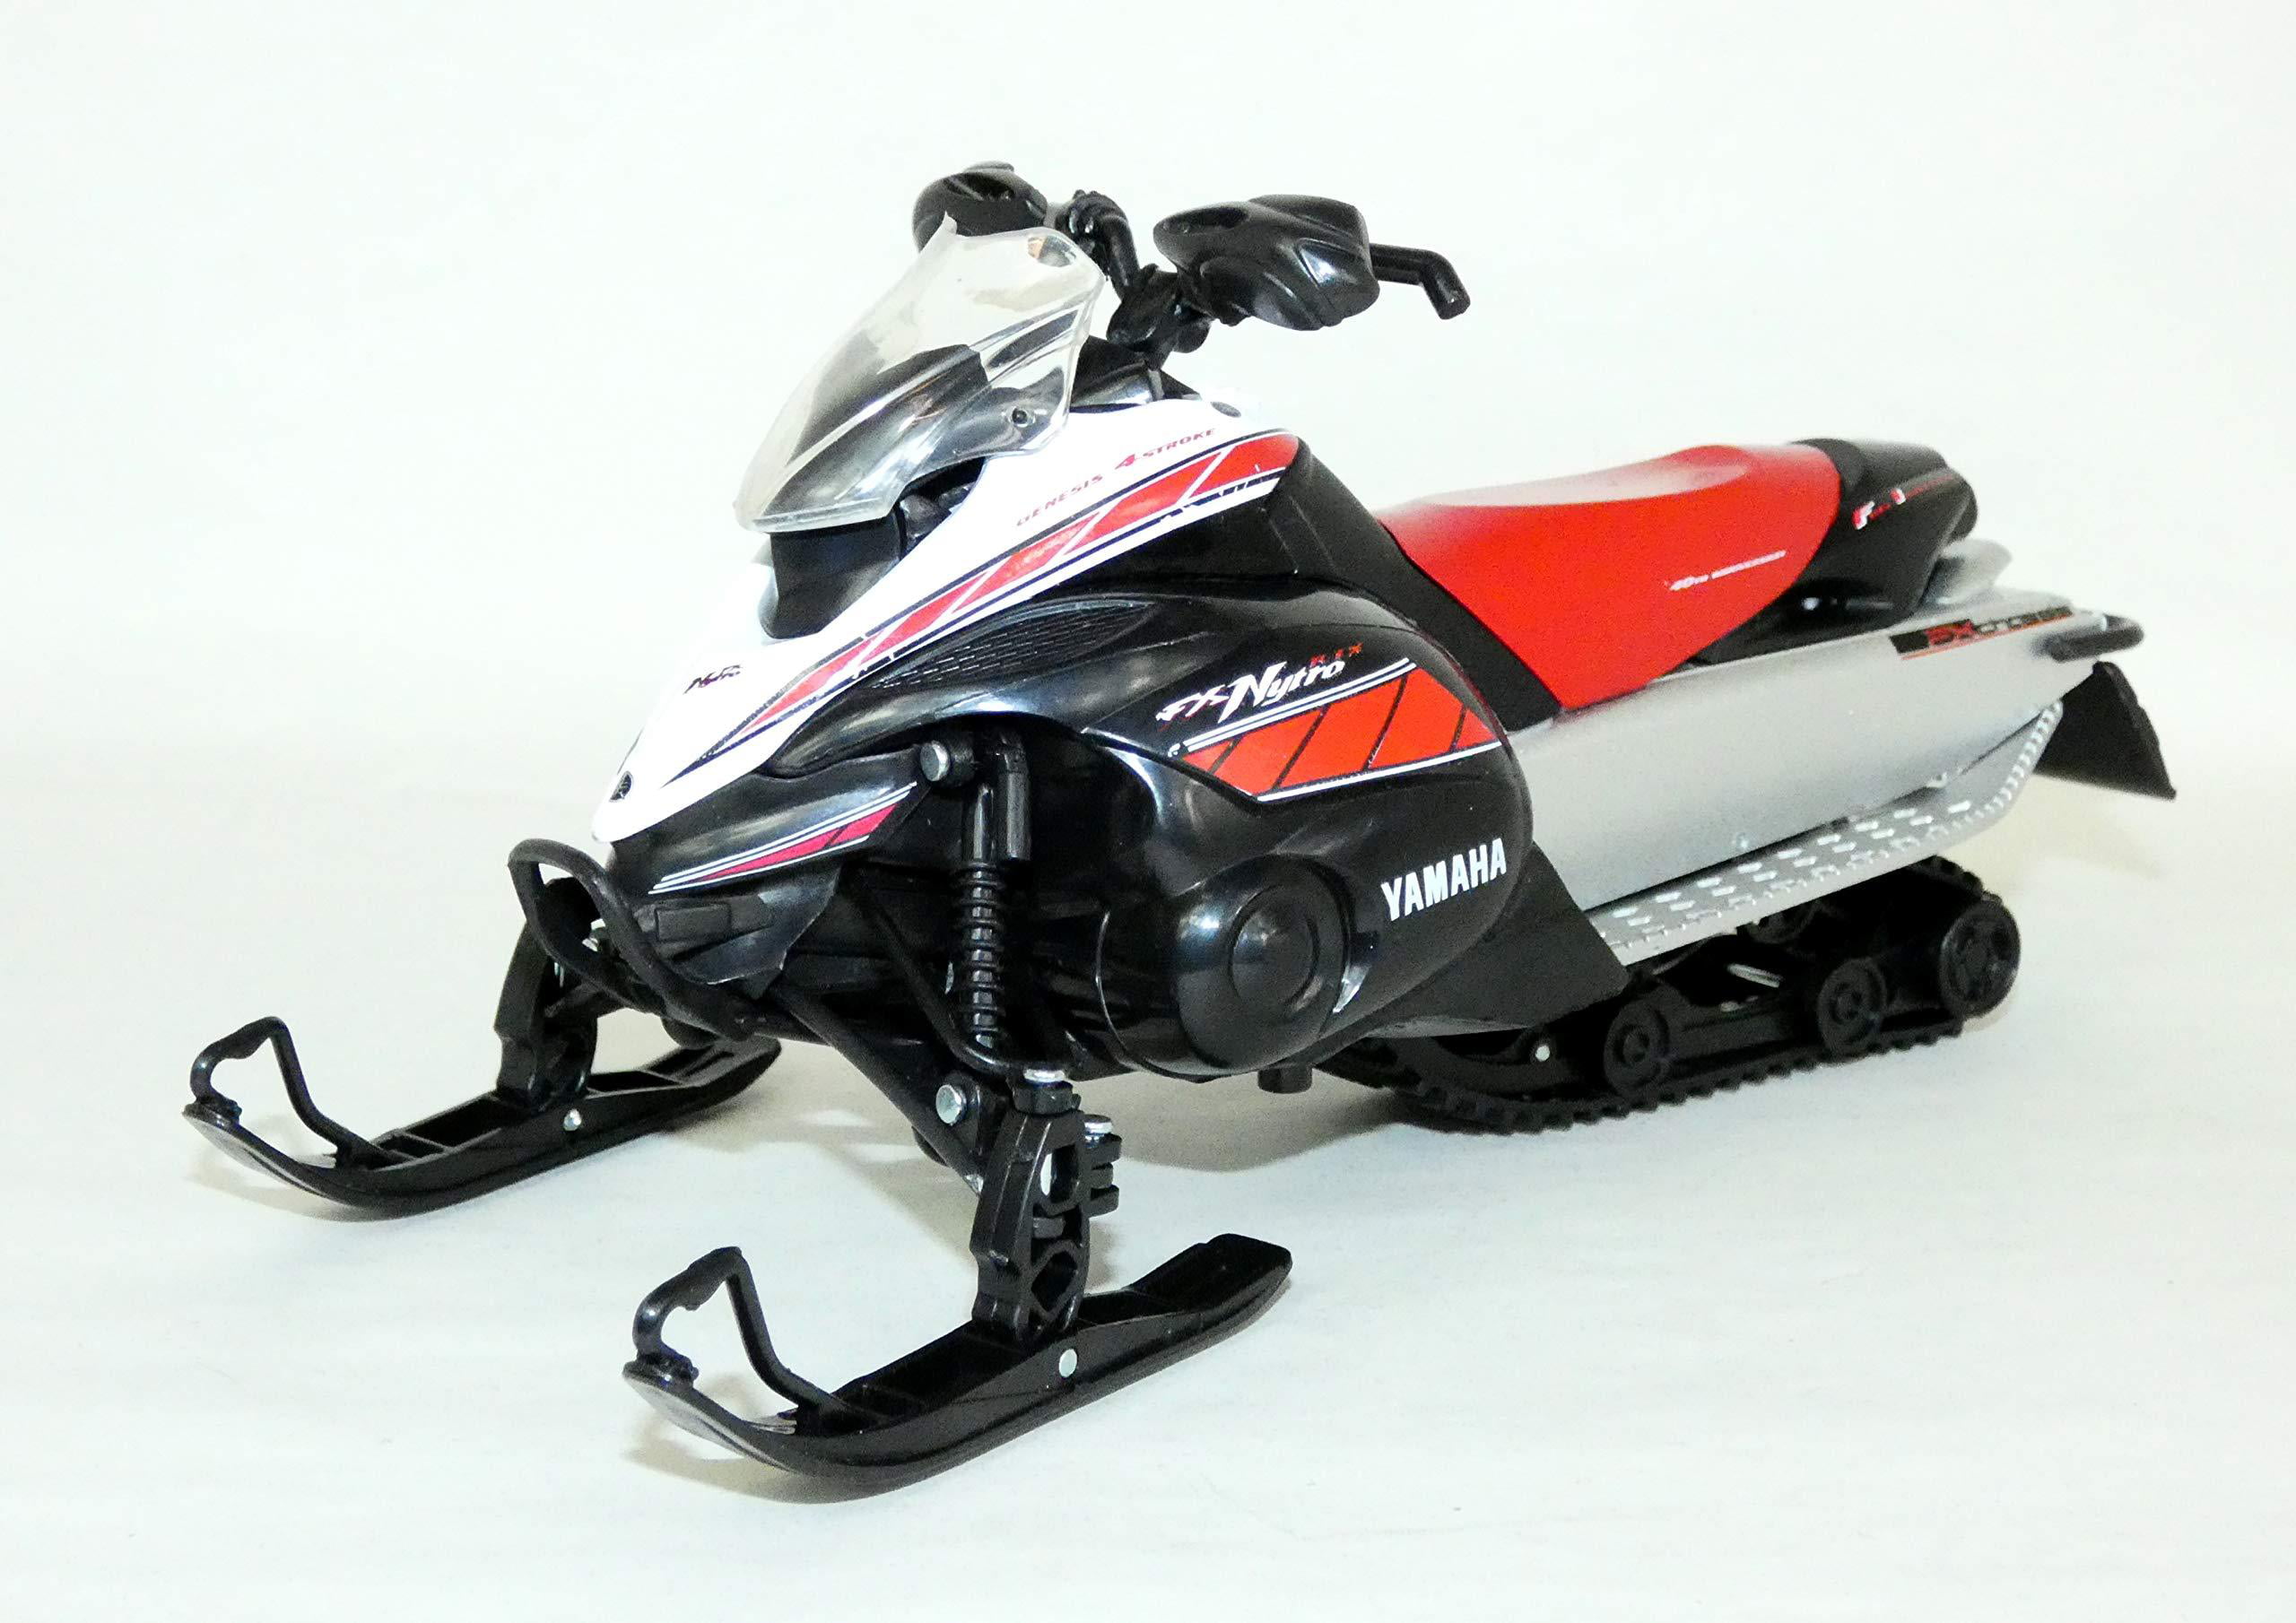 Yamaha FX Snowmobile New Ray White 1:12 Scale